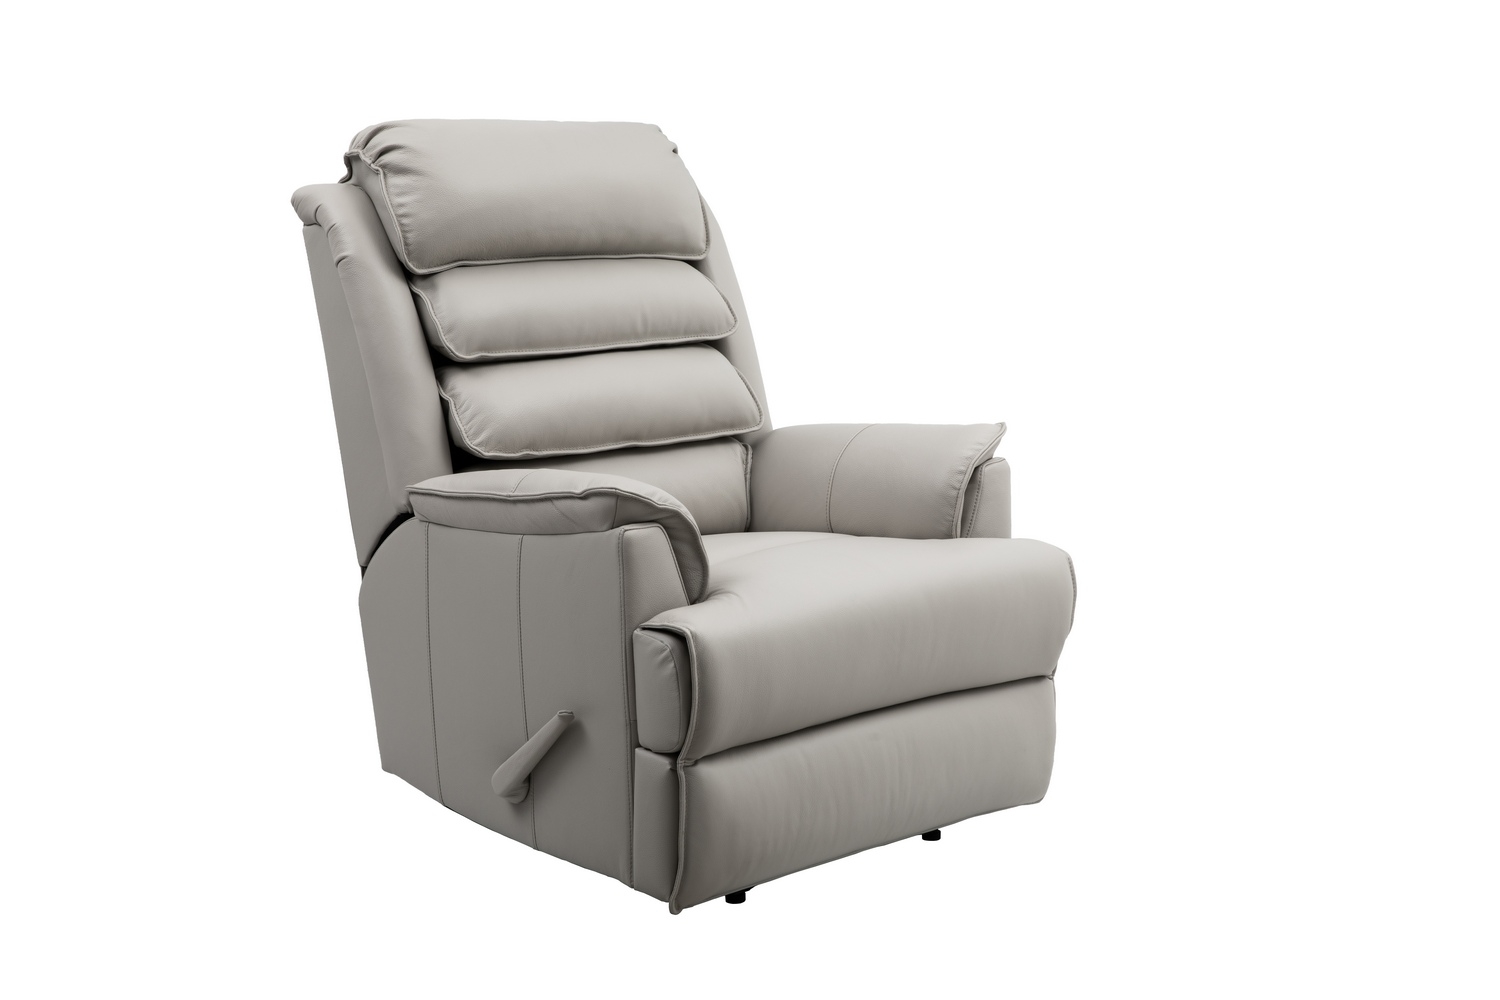 Barcalounger Gatlin Big and Tall Recliner Chair - Gable Dove/Leather match